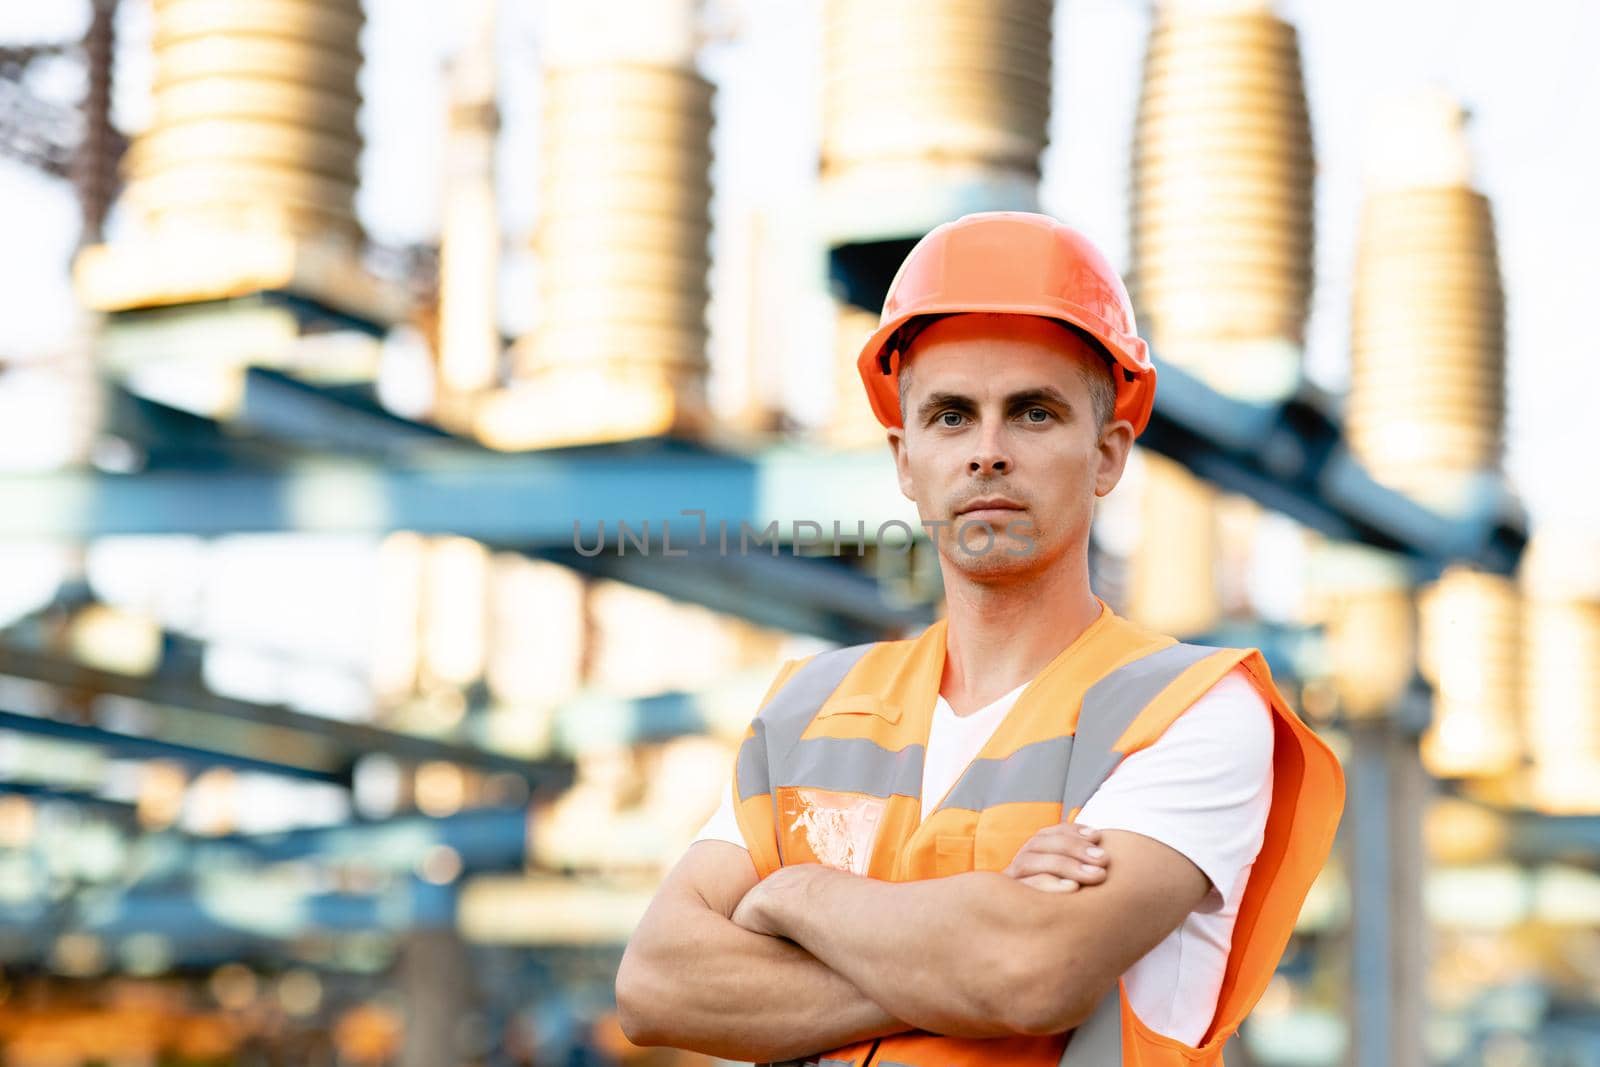 Portrait of engineer worker in uniform and helmet standing near high voltage substation with tall pylons and voltage distribution cables.